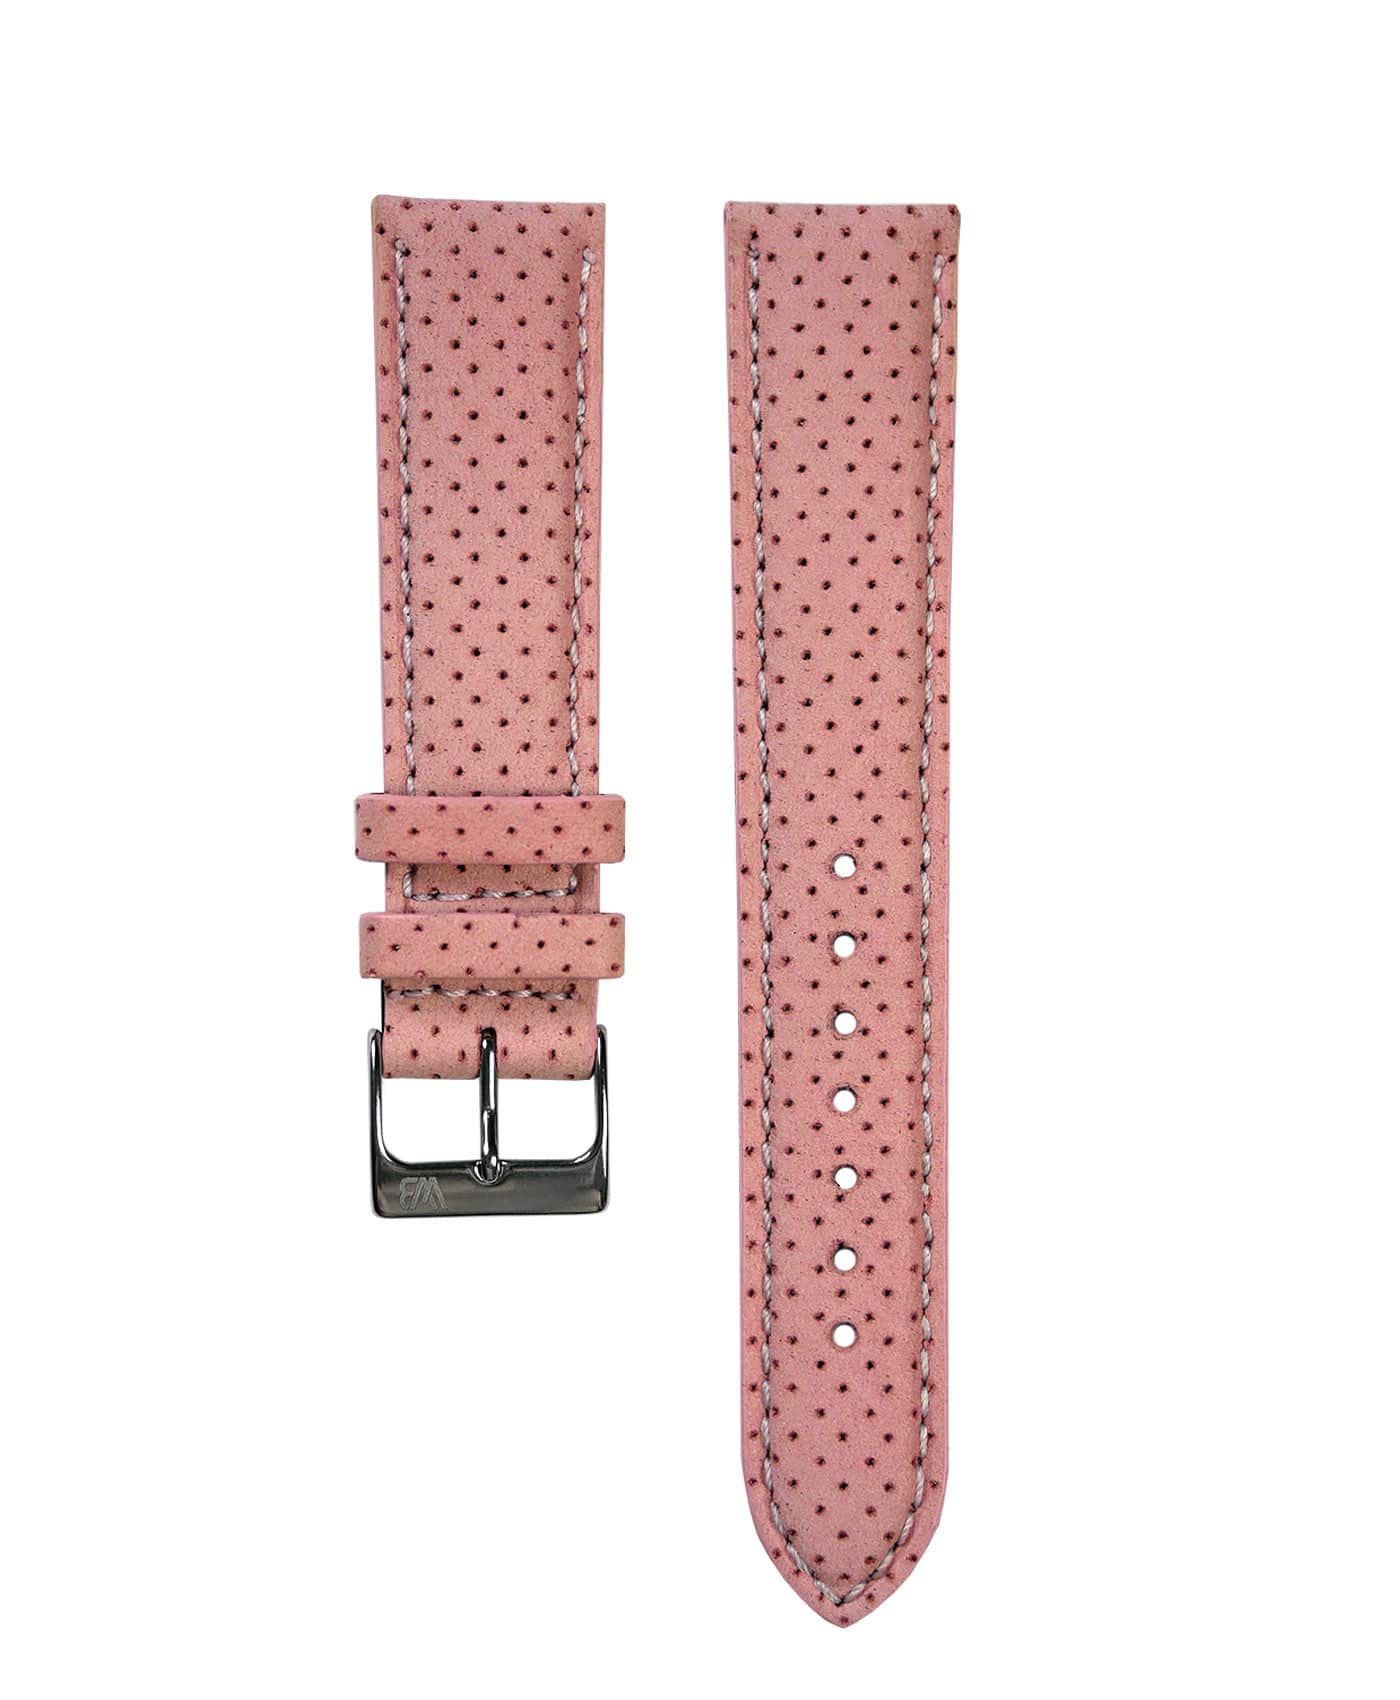 WB-perforated-nubuck-leather-watch-strap-rose-pink